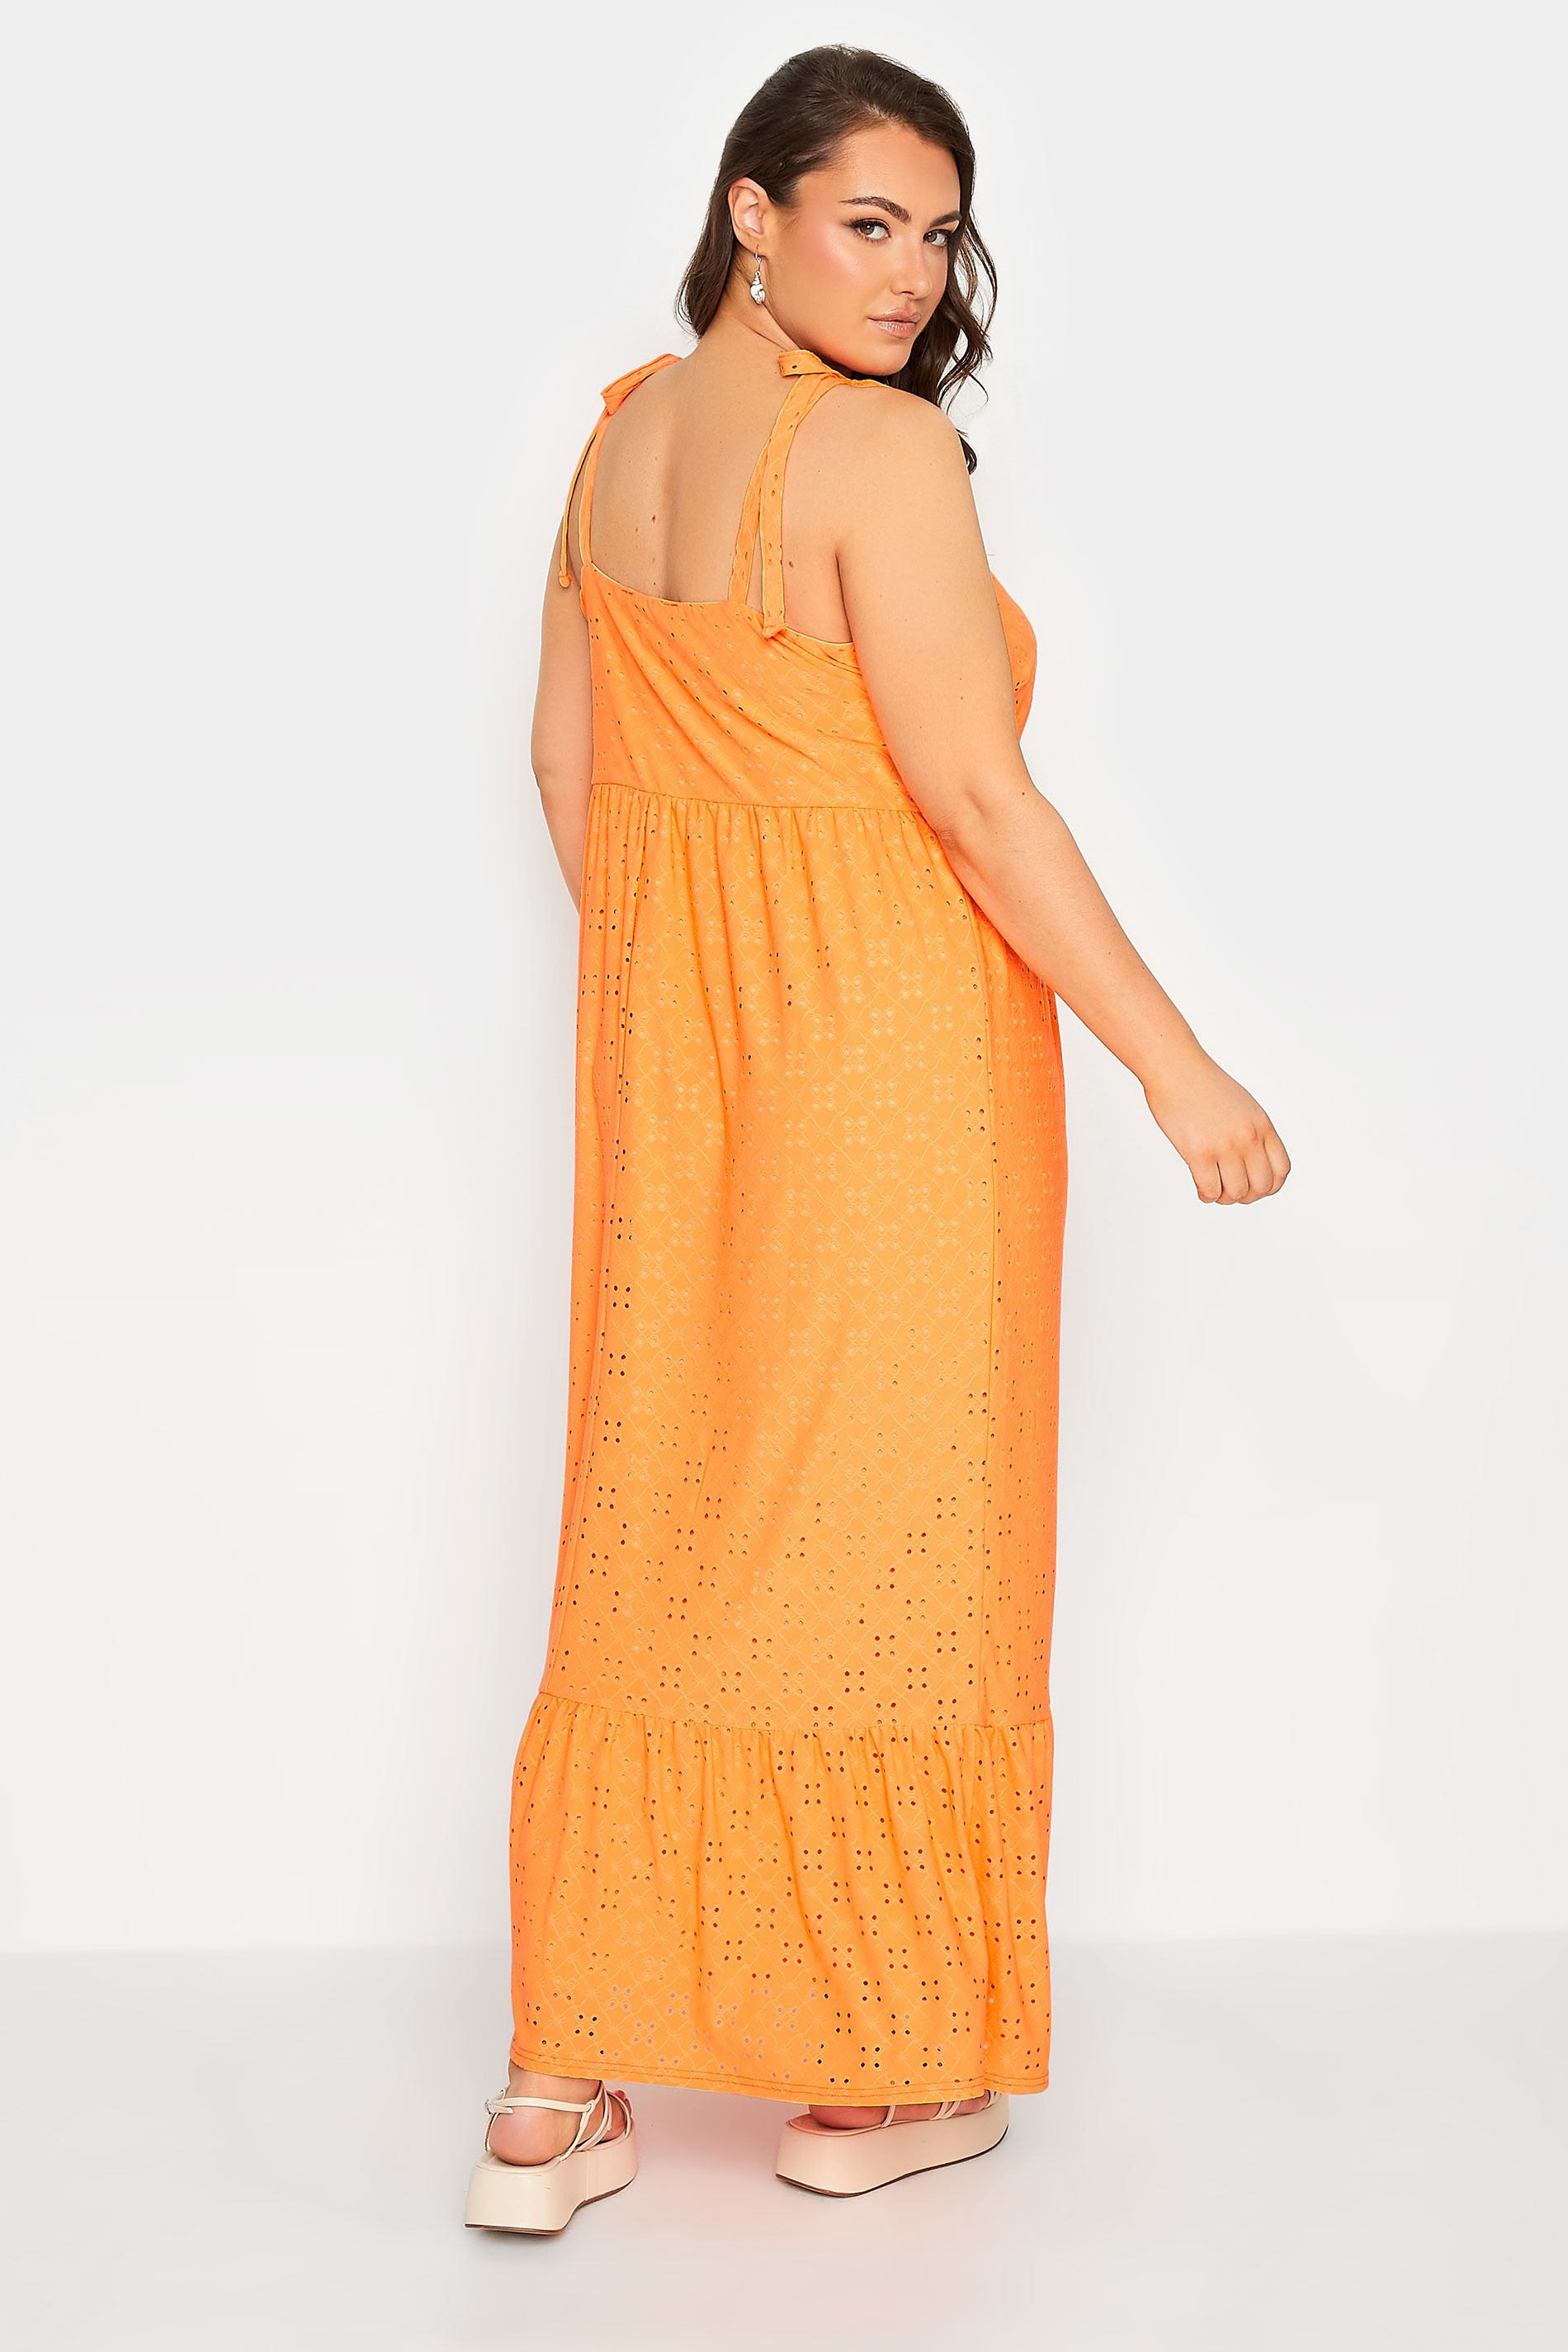 YOURS Curve Plus Size Bright Orange Broderie Anglaise Maxi Dress | Yours Clothing  3